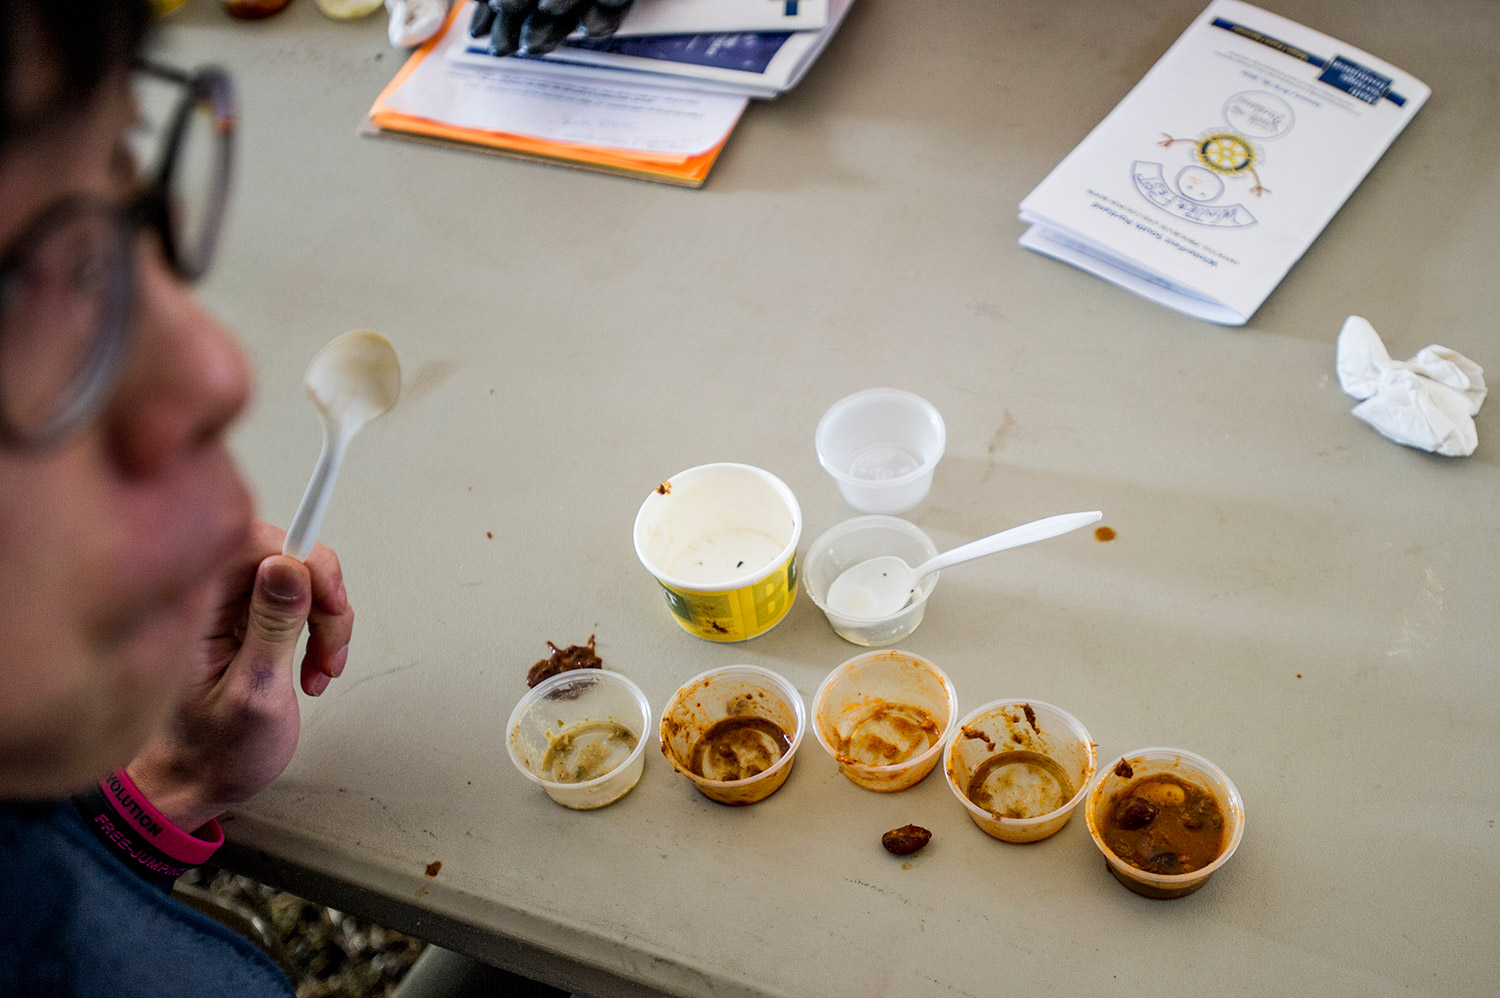 SOUTH PORTLAND, ME - JANUARY 30: Fabian Yue (cq), of Hong Kong, an exchange student at South Portland high school, takes a break while sampling a variety of chilis at the chili/chowder cookoff at the Wainwright Recreation Complex Saturday, January 30, 2016. (Photo by Gabe Souza/Staff Photographer)